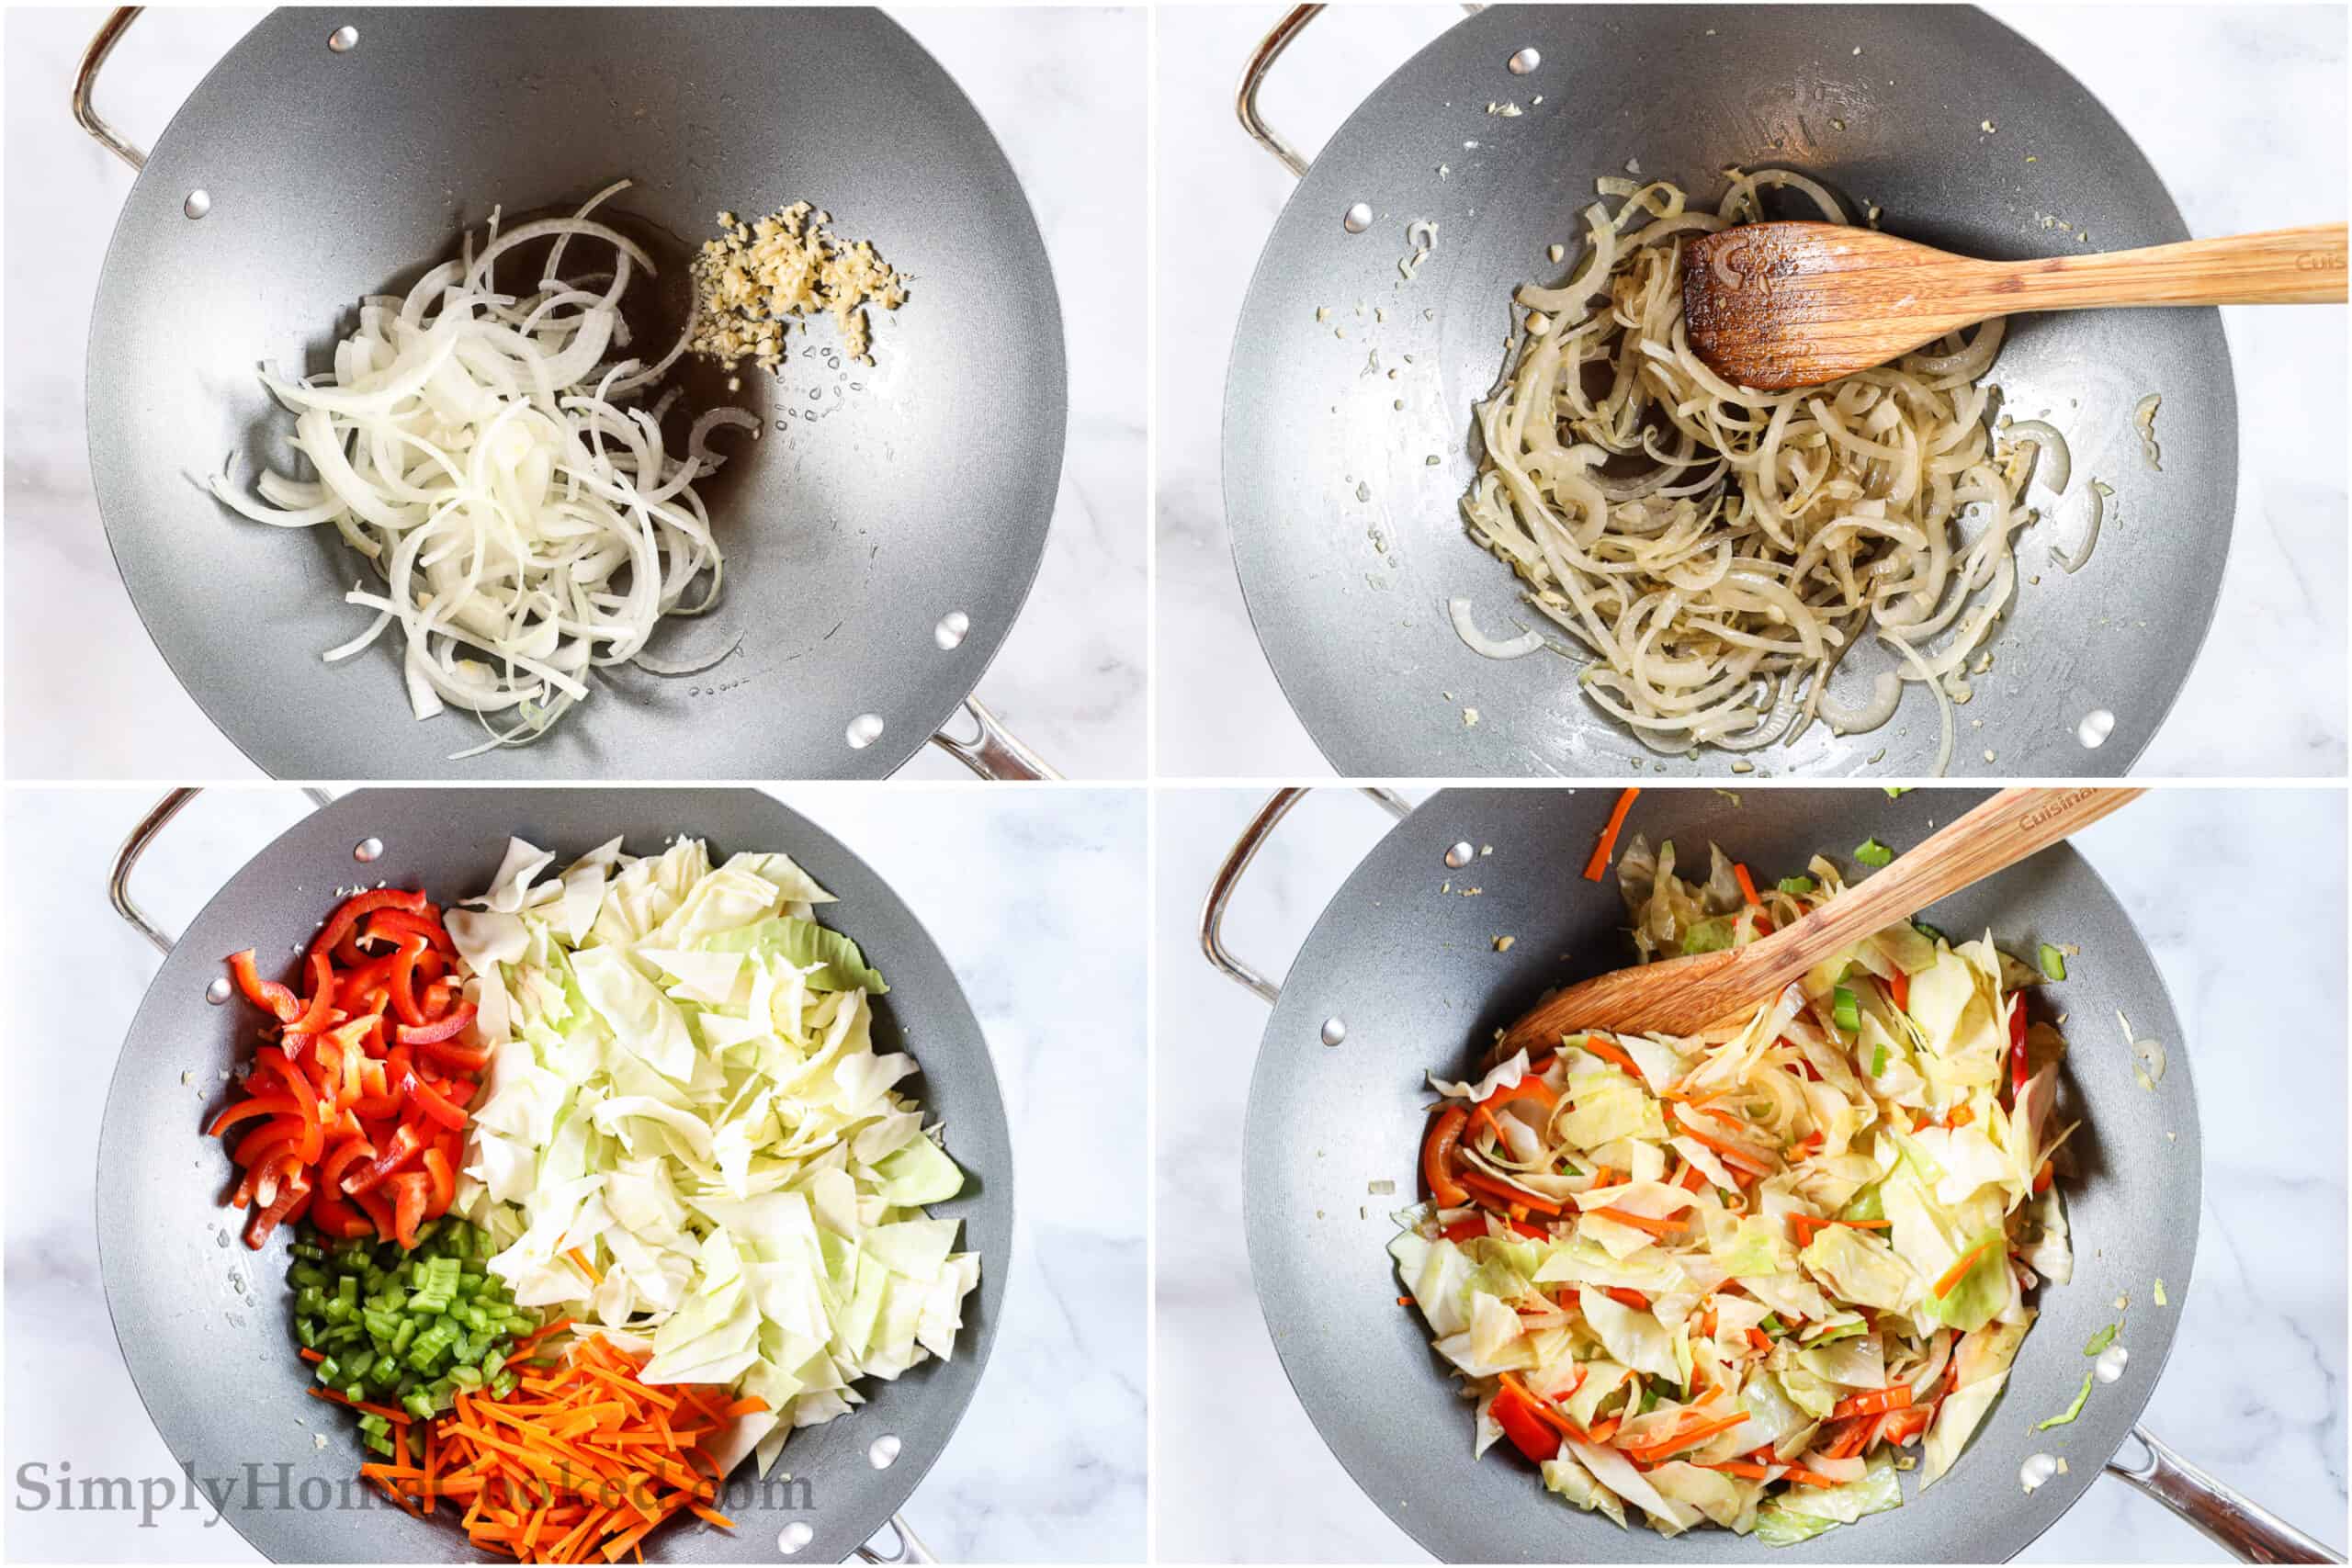 Steps to make 30-Minute Shrimp Chow Mein, including cooking the garlic and onion, stirring with a wooden spoon, and then adding the pepper, cabbage, celery, and carrots, before stirring and cooking them until tender.